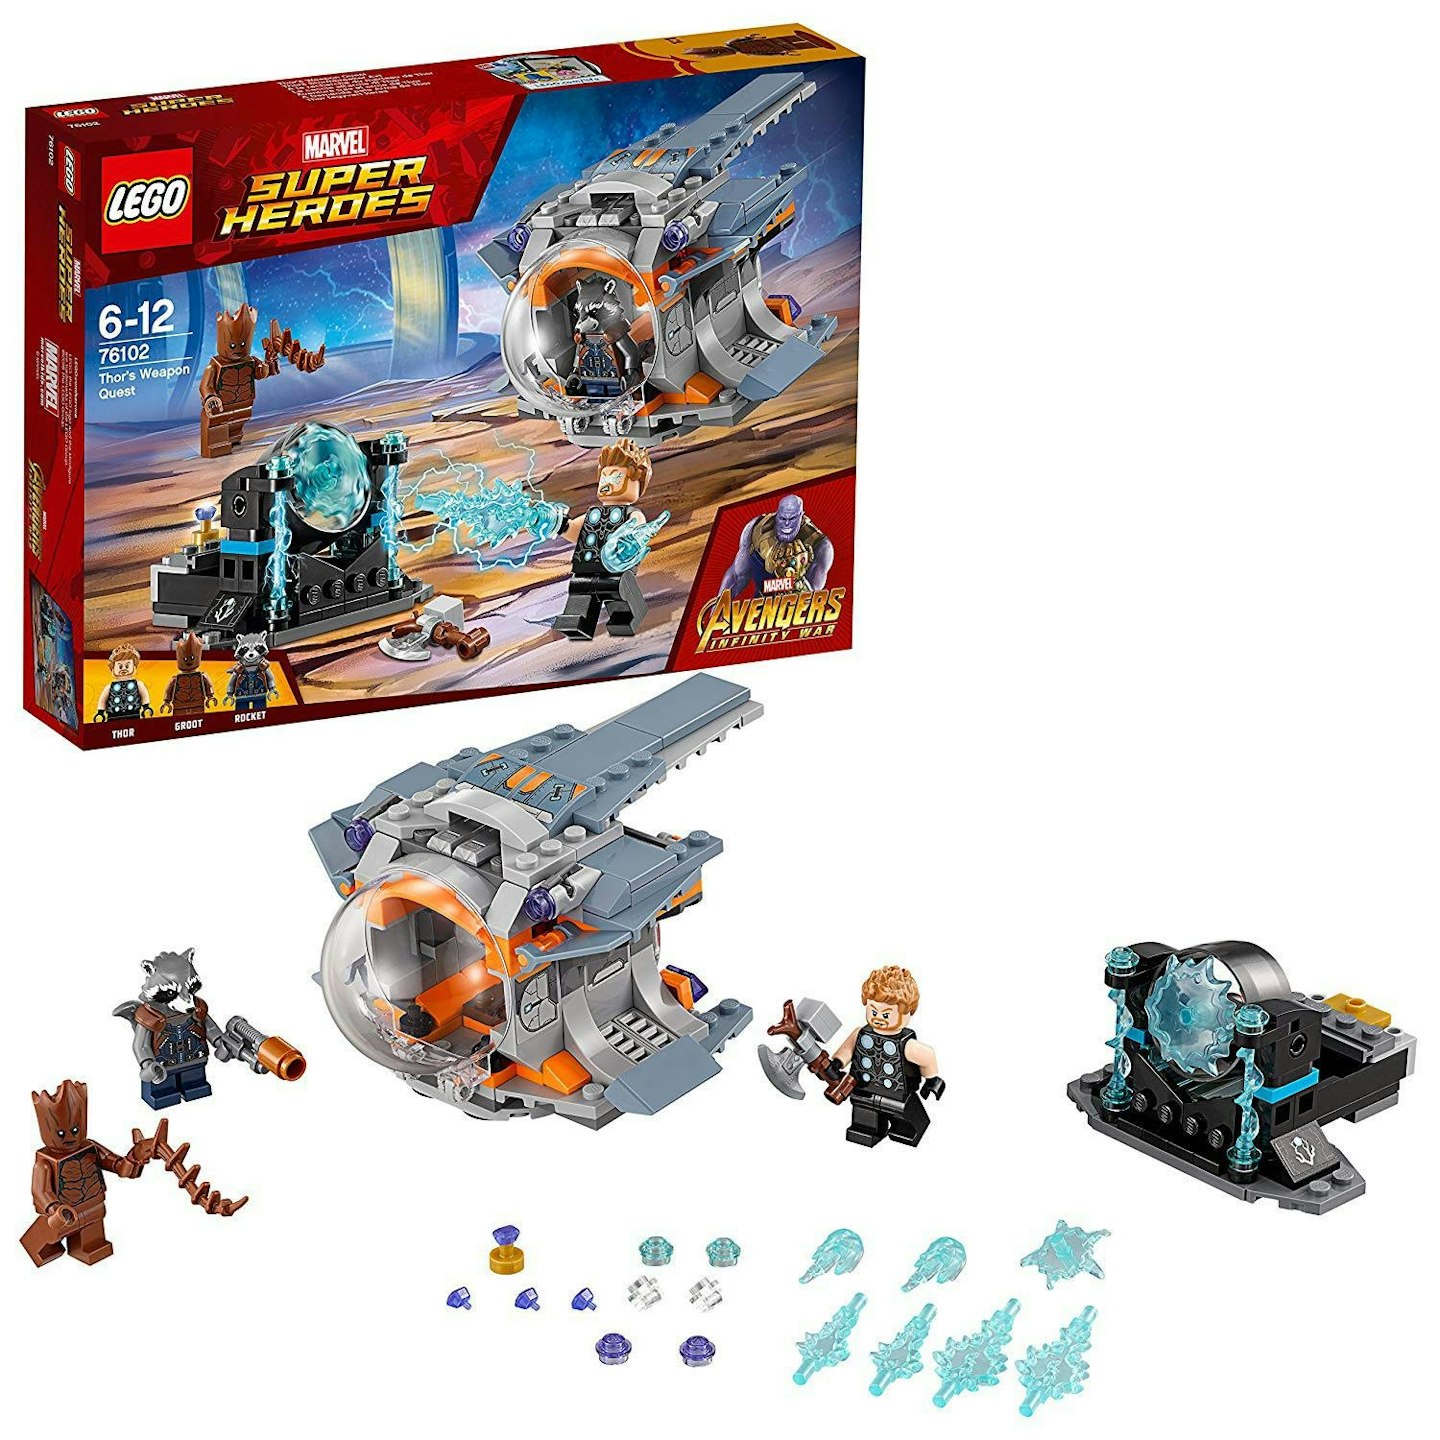 Lego Thoru2019s Weapon Quest Playset, £23.99